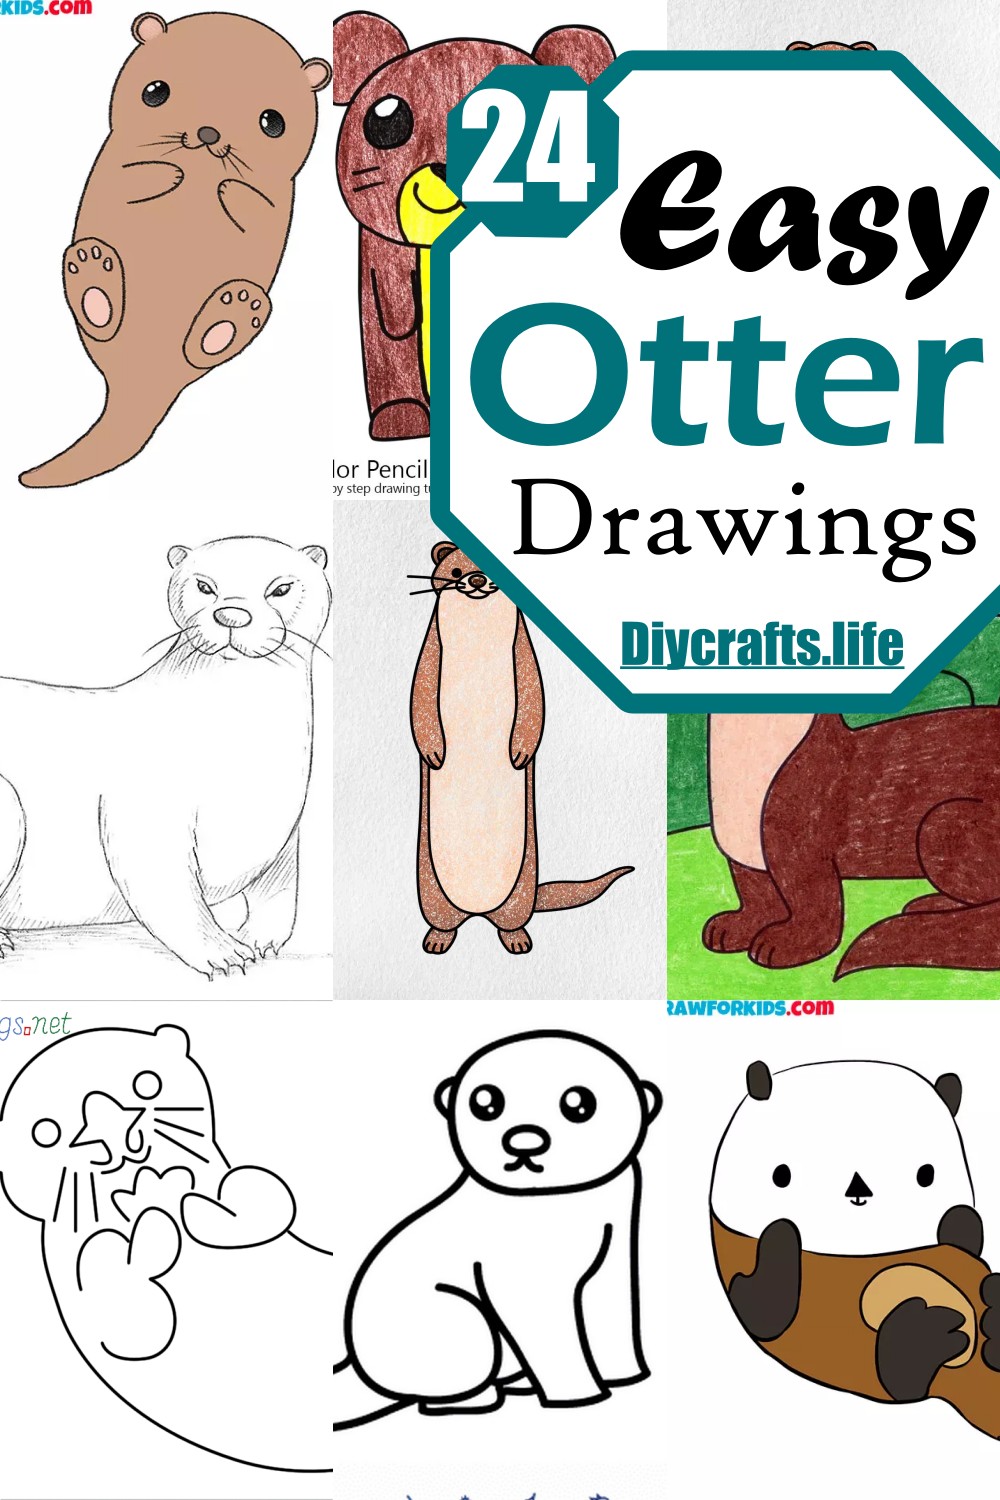 Easy Otter Drawings